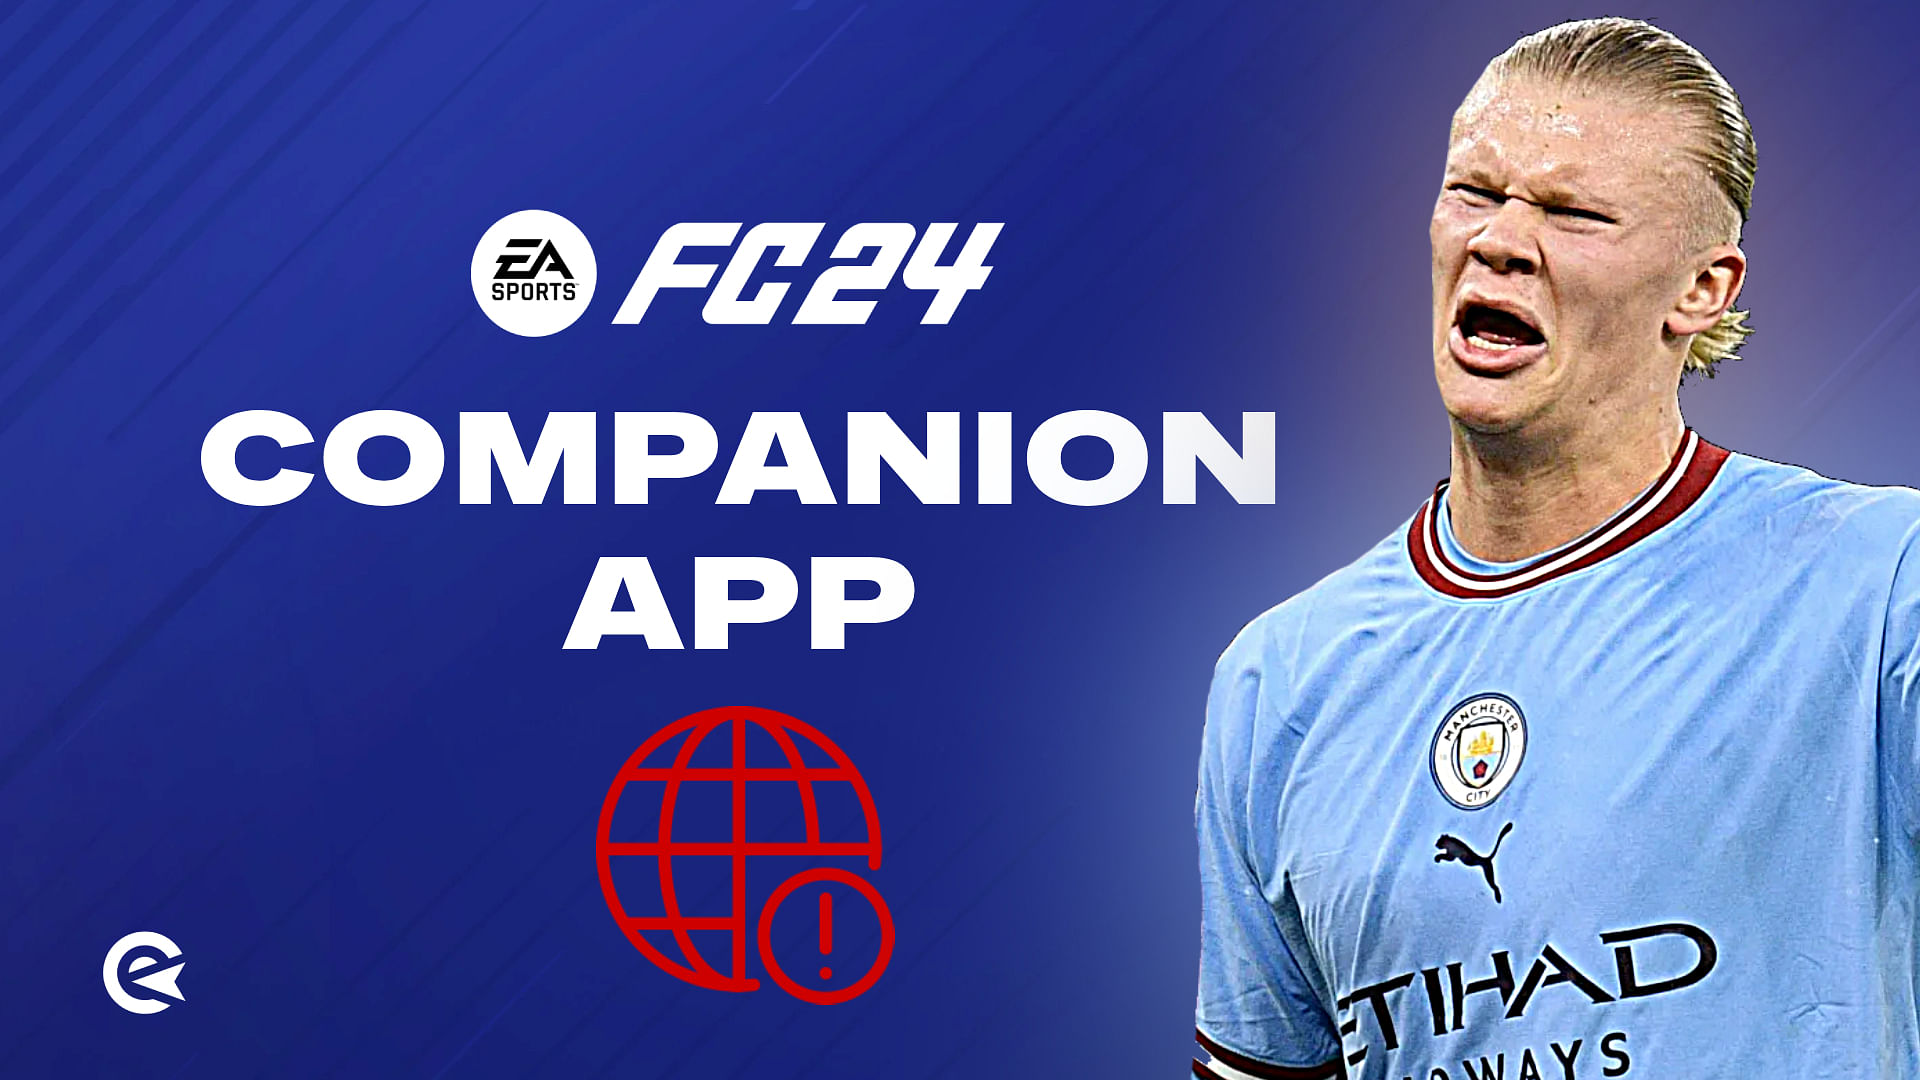 EA FC 24: When does the companion app come out?